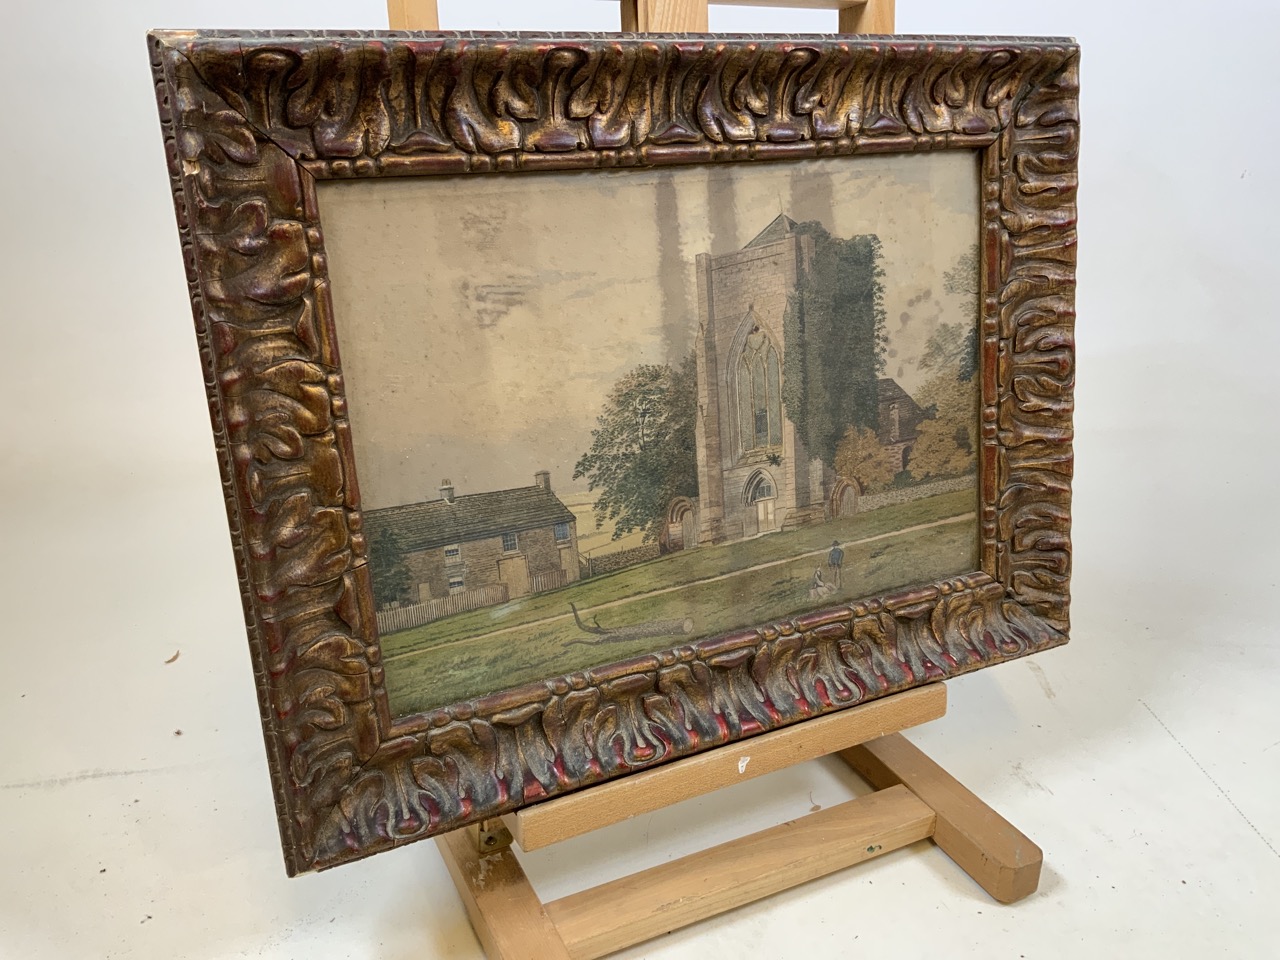 Framed watercolour of small parish church. Signature present, of indeterminate form.W:54cm x H: